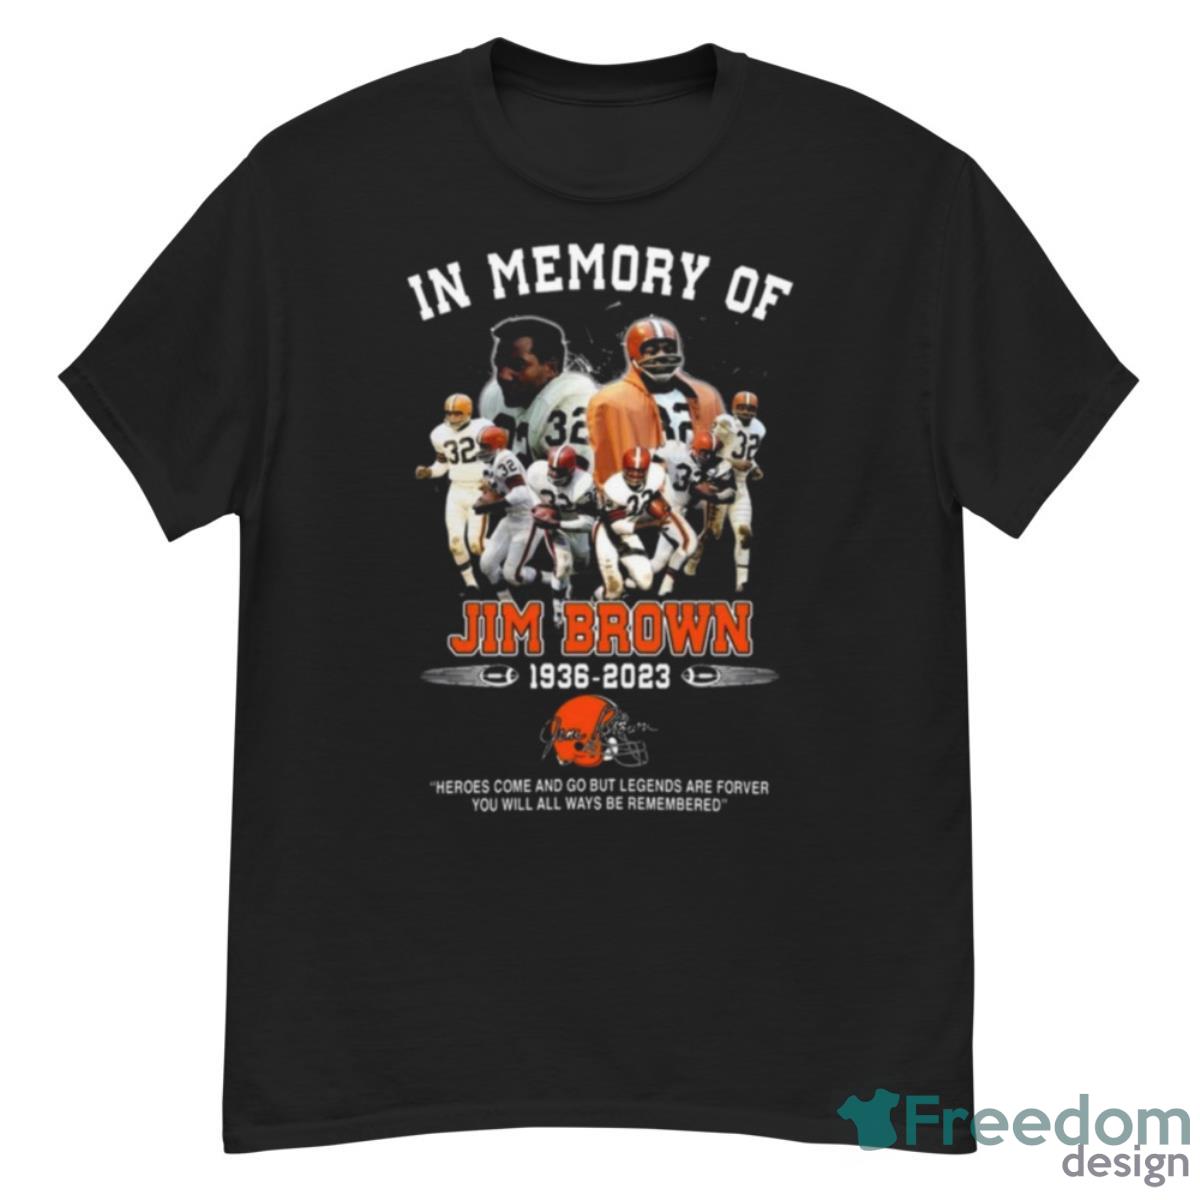 NFL Legend Jim Brown In Memory Of 1936 2023 Heroes Come And Go But Legends Are Forever Shirt - G500 Men’s Classic T-Shirt